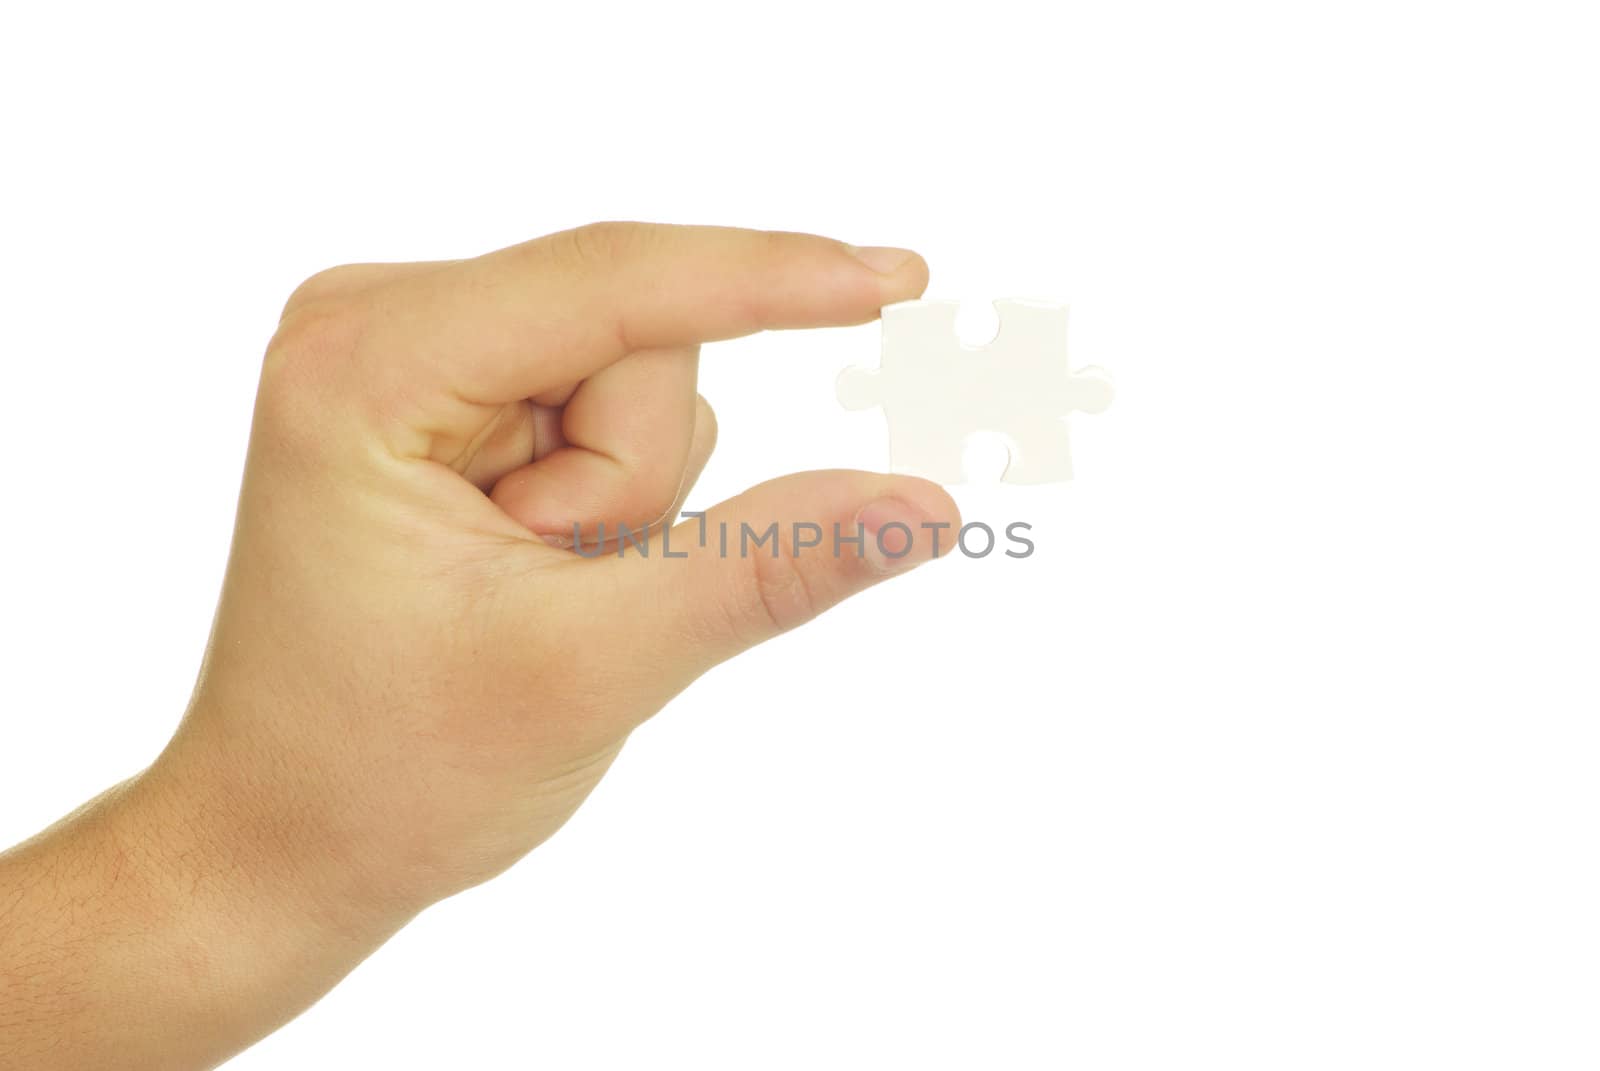  puzzle in hand isolated on white background